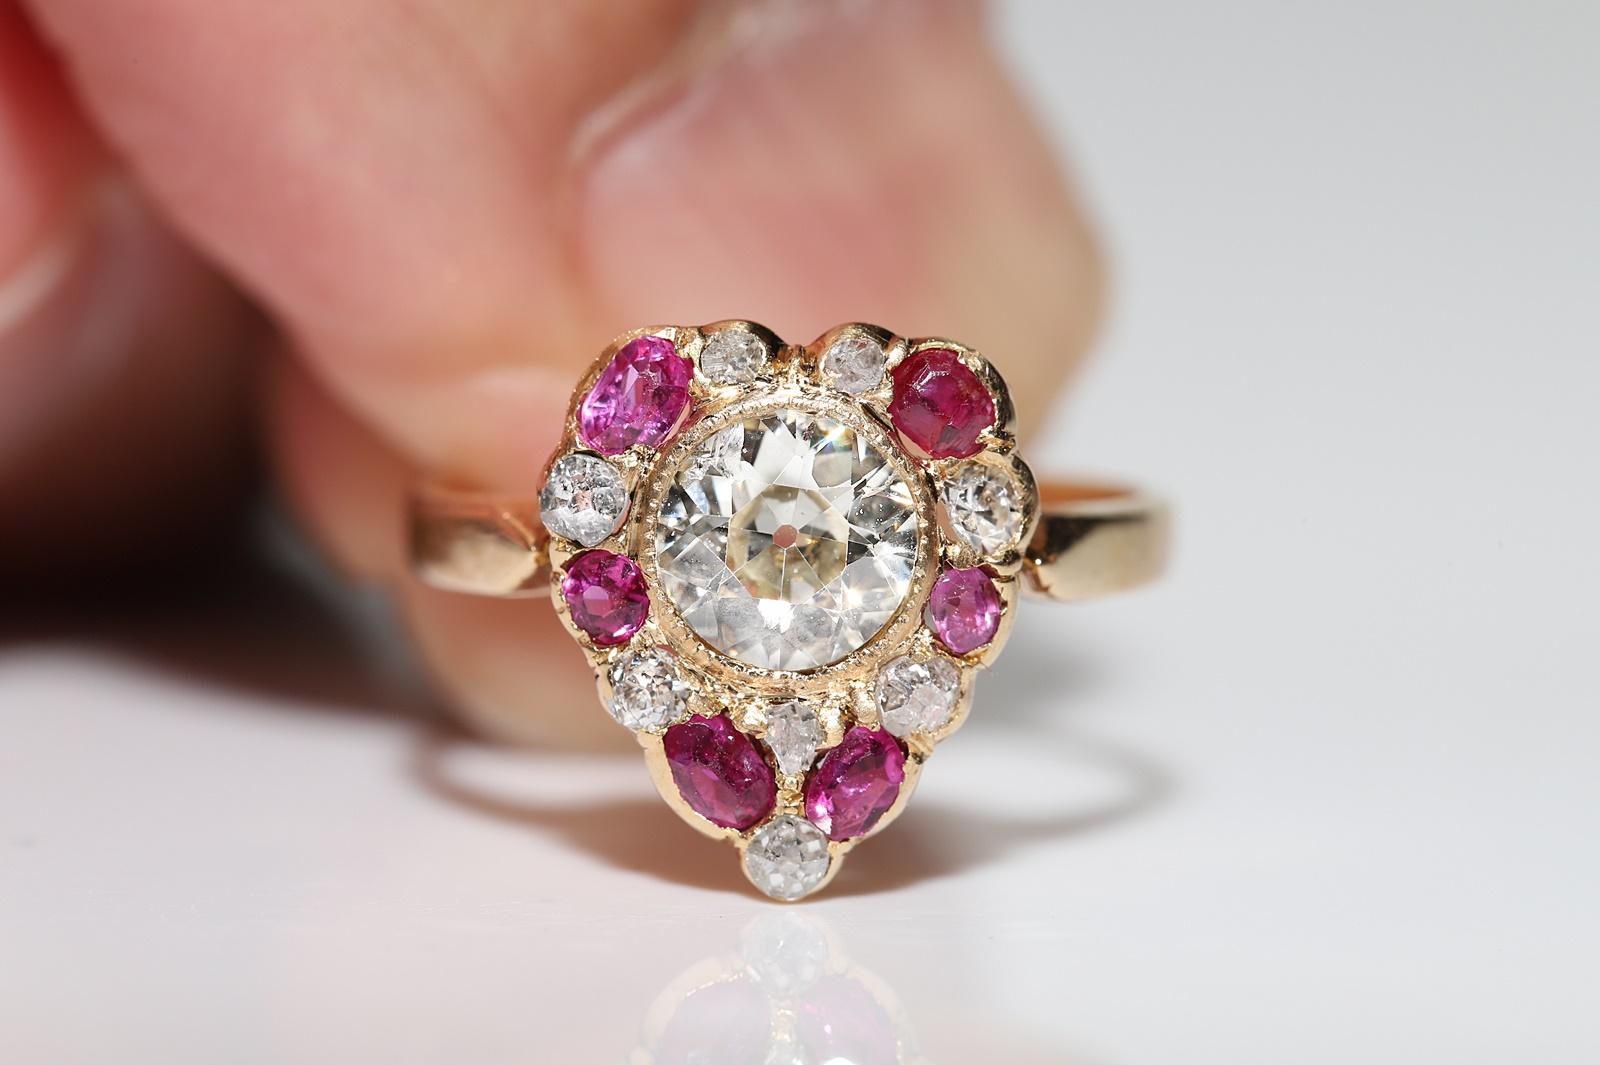 Women's Antique Circa 1900s 18k Gold Natural Diamond And Ruby Decorated Ring For Sale